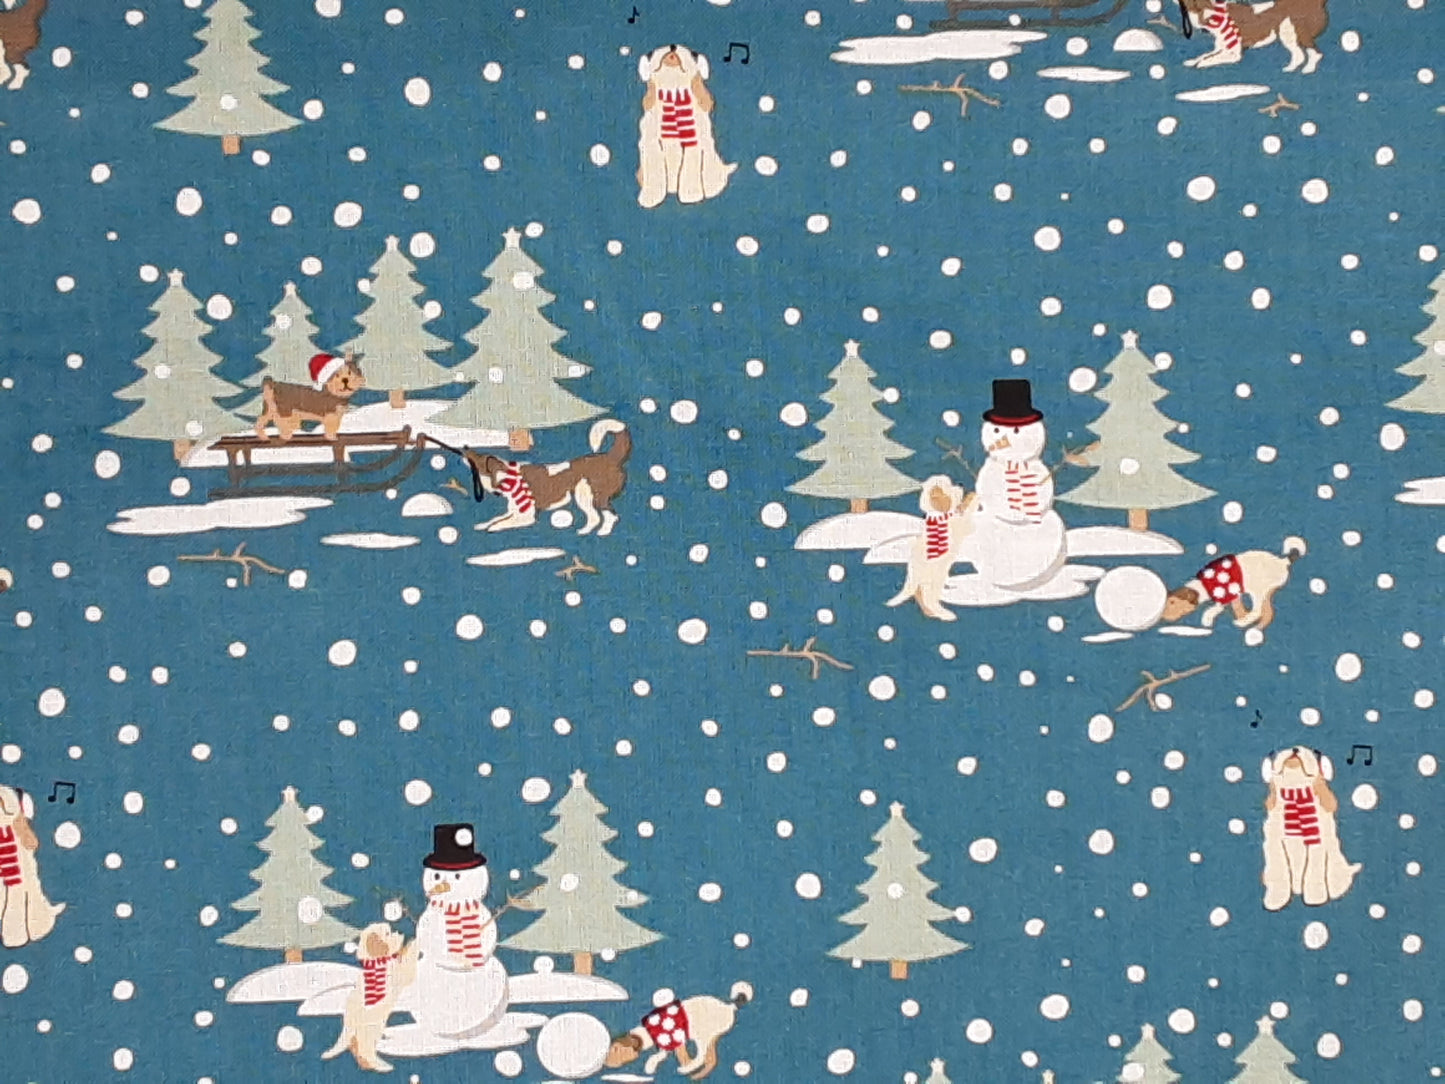 Playing In The Snow- Cotton Prints